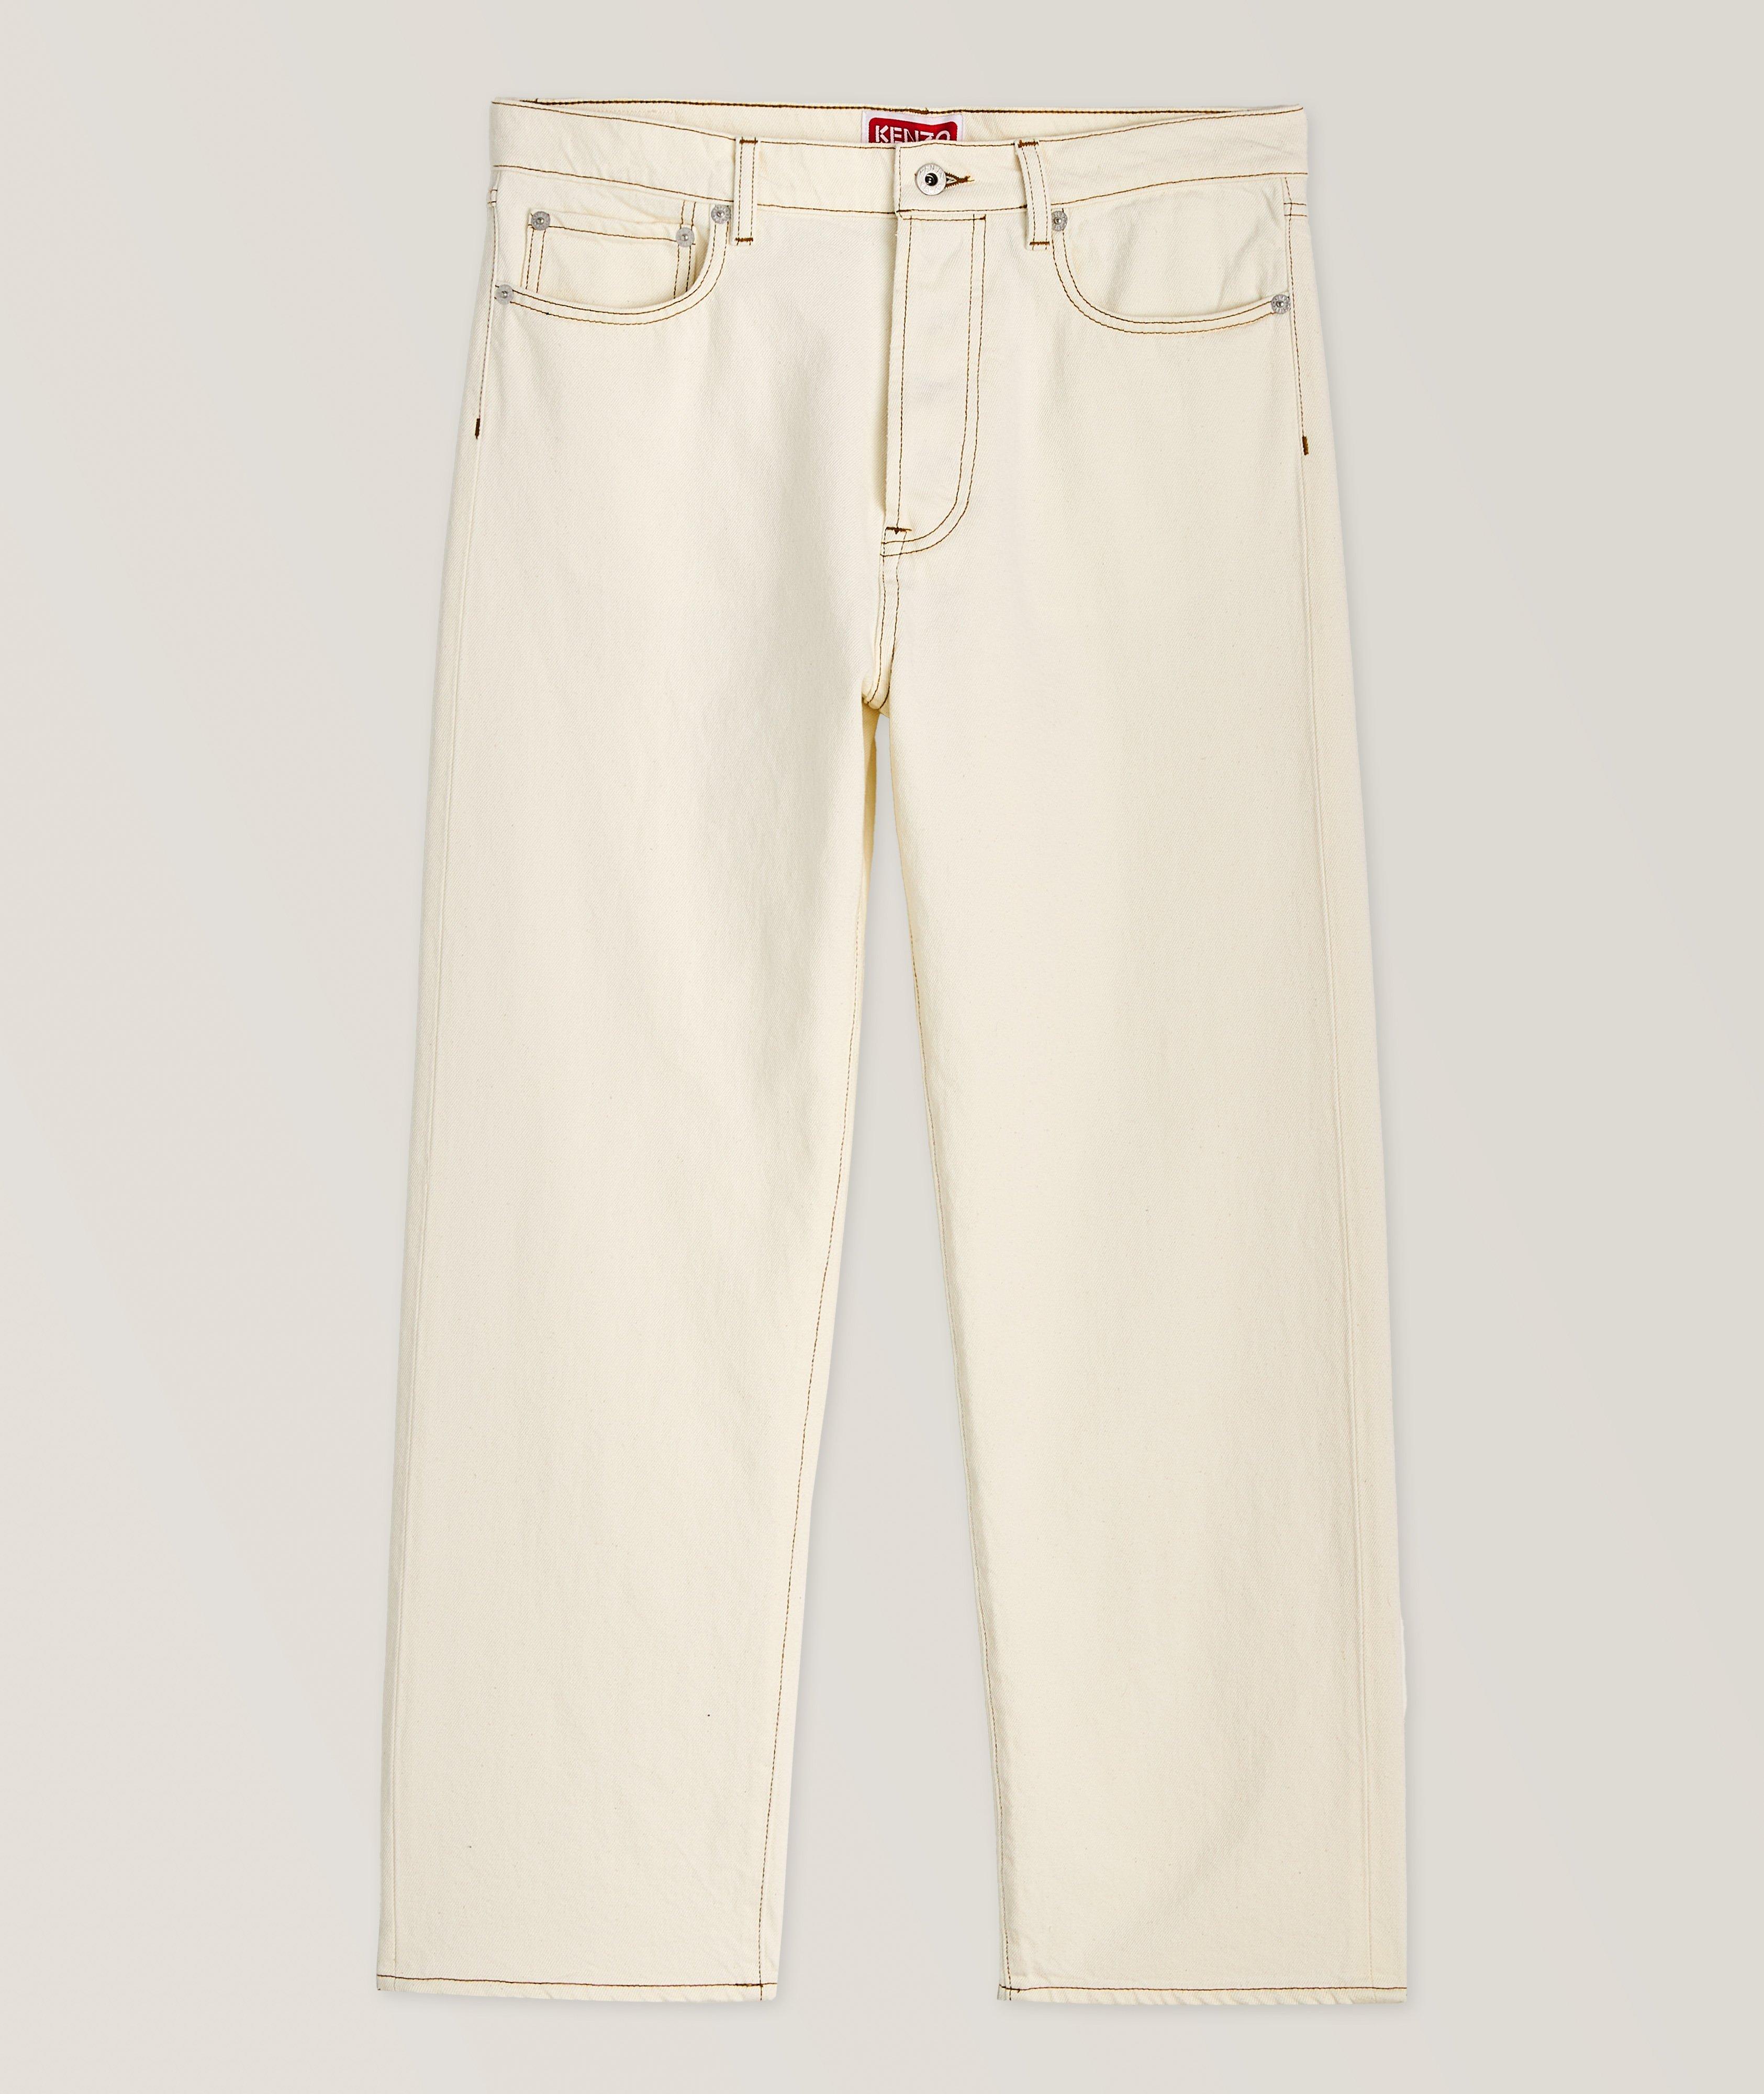 Asagao Cropped Straight Jeans image 0